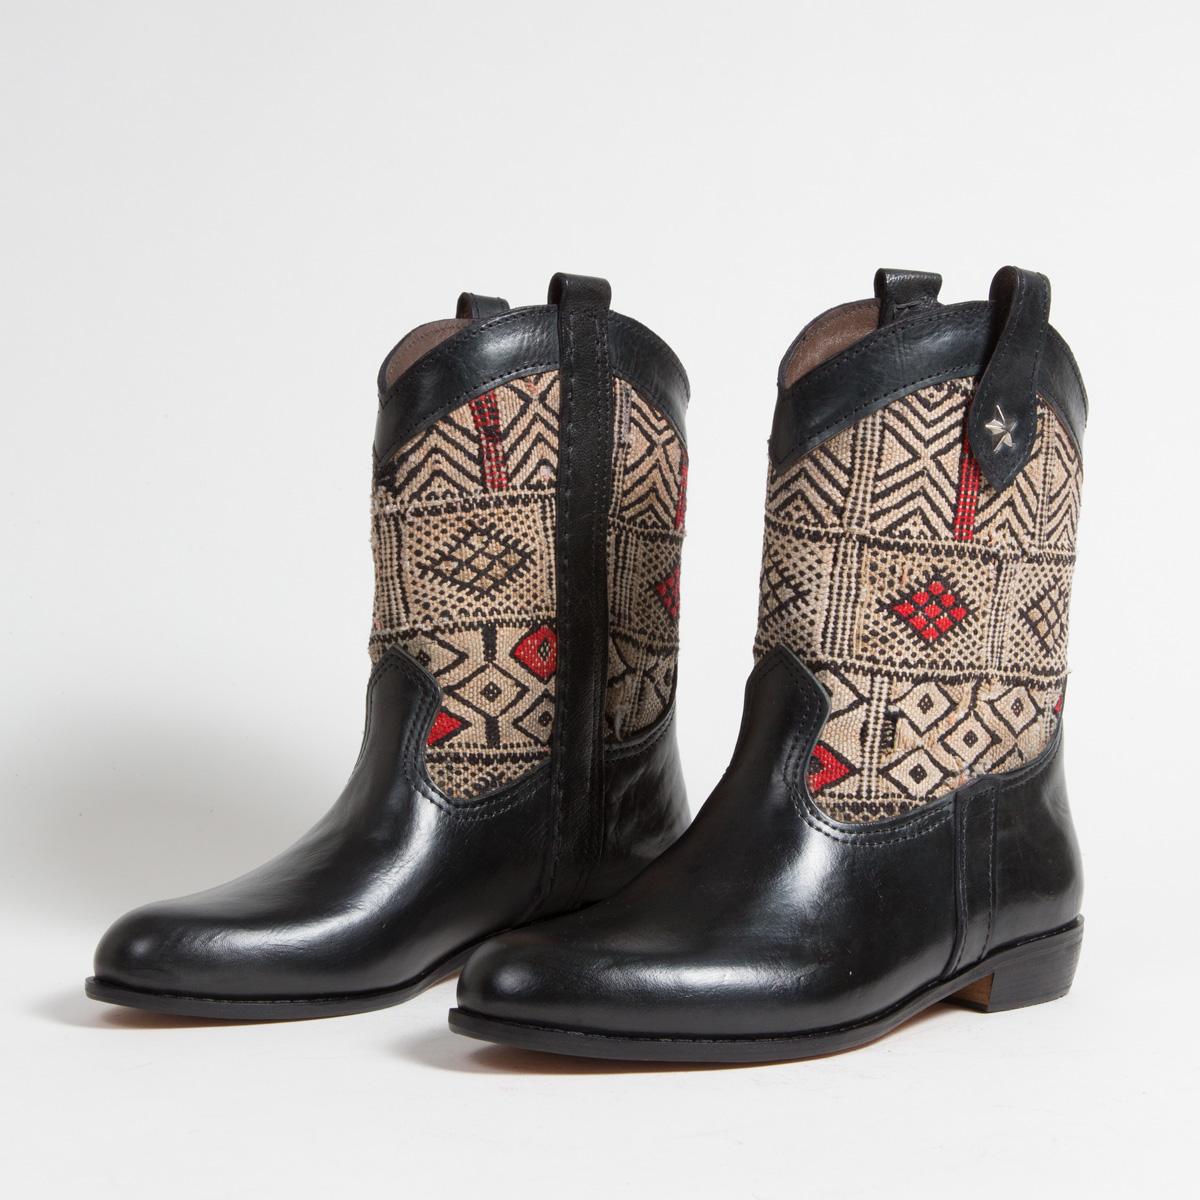 Bottines Kilim cuir mababouche artisanales (Réf. MN15-41)